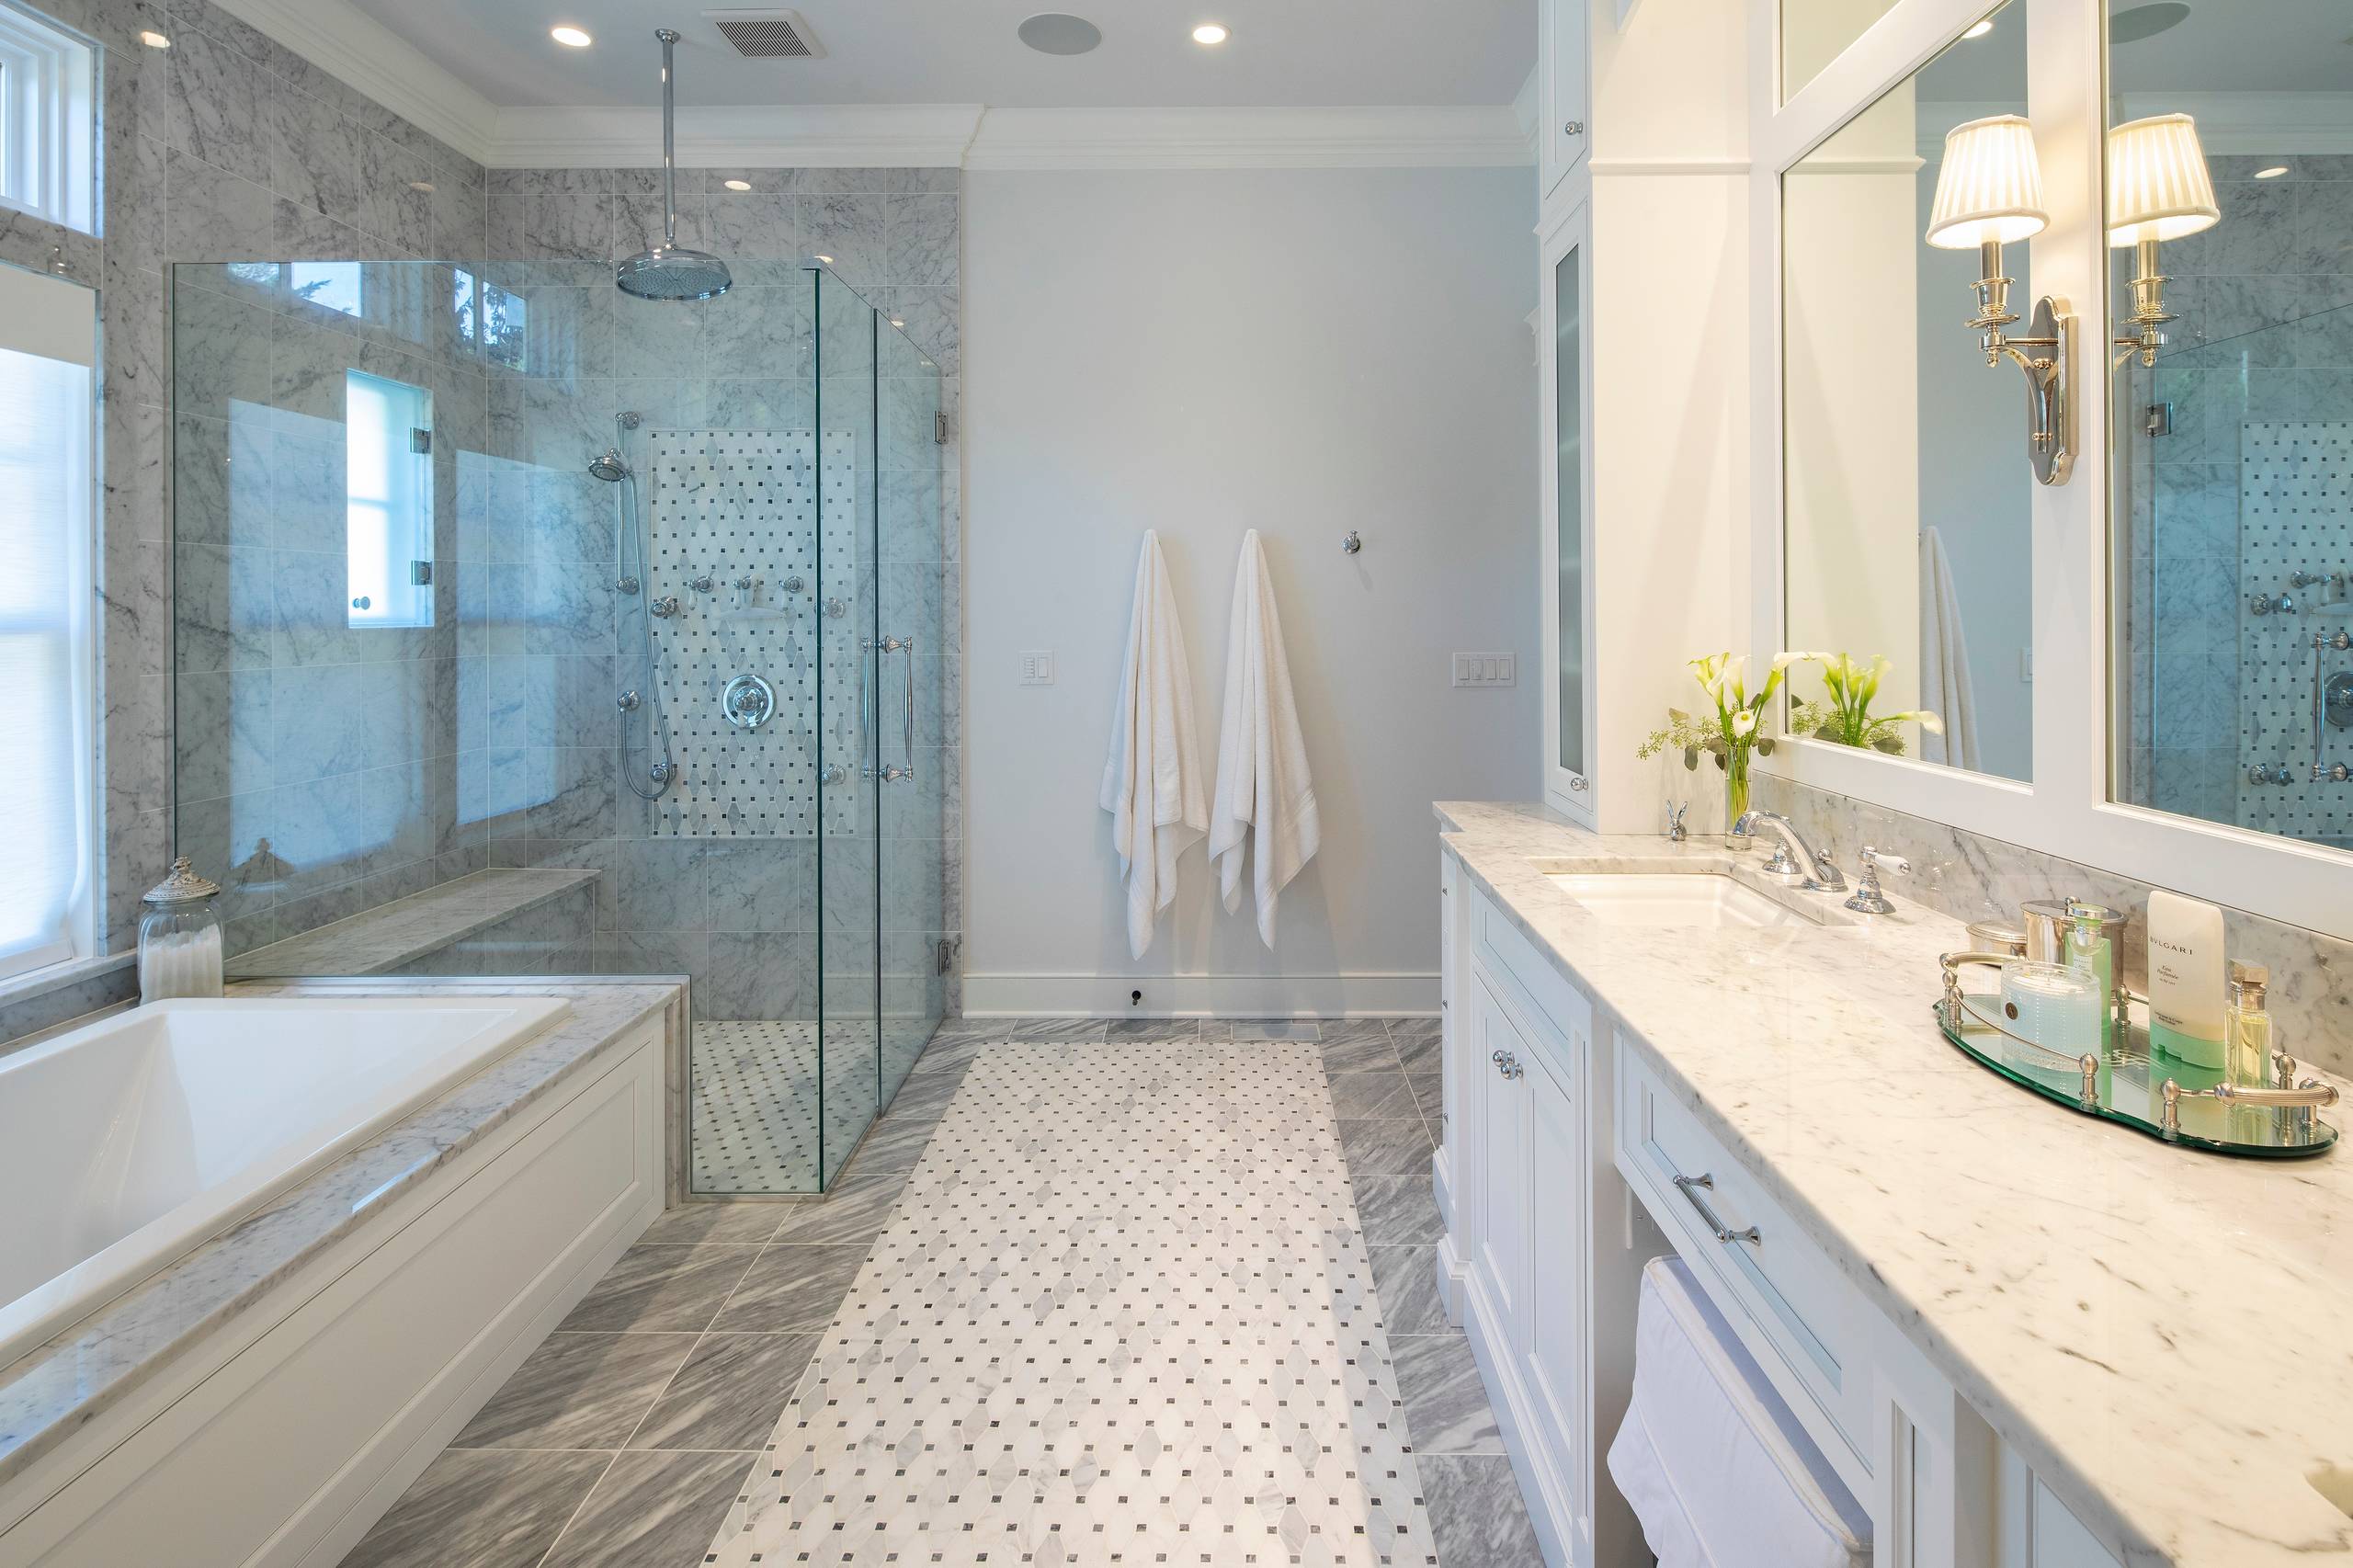 Open Concept Bathroom with Doorless, Curbless Showers - Normandy Remodeling